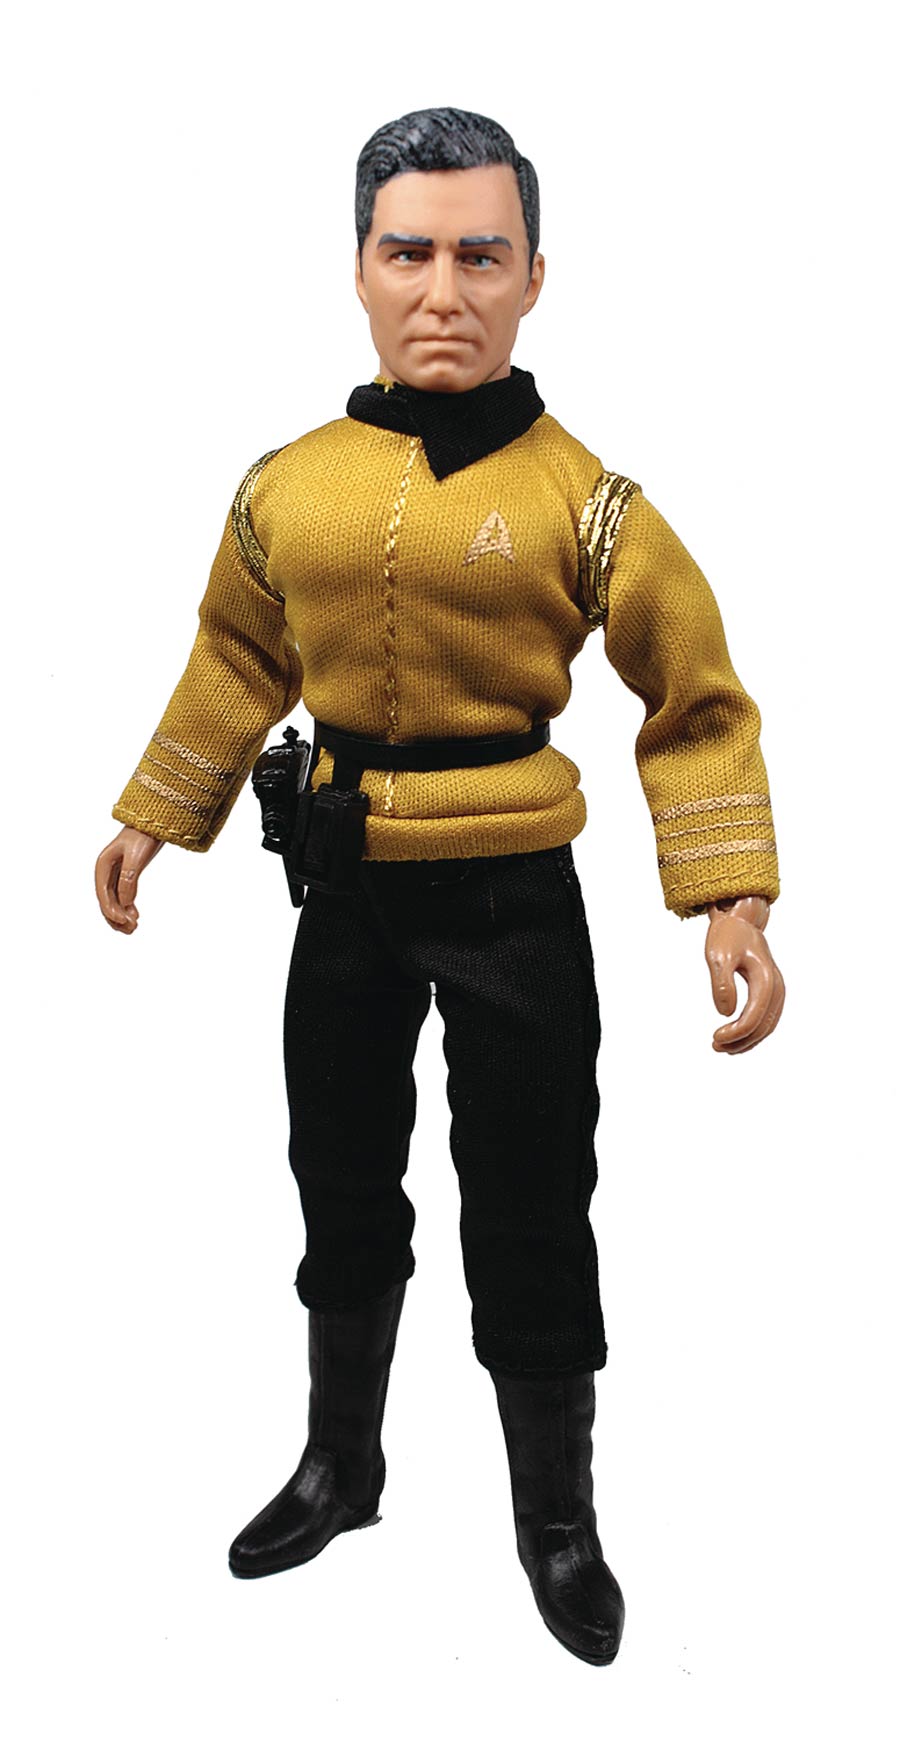 Mego Star Trek Discovery 8-Inch Action Figure - Captain Pike